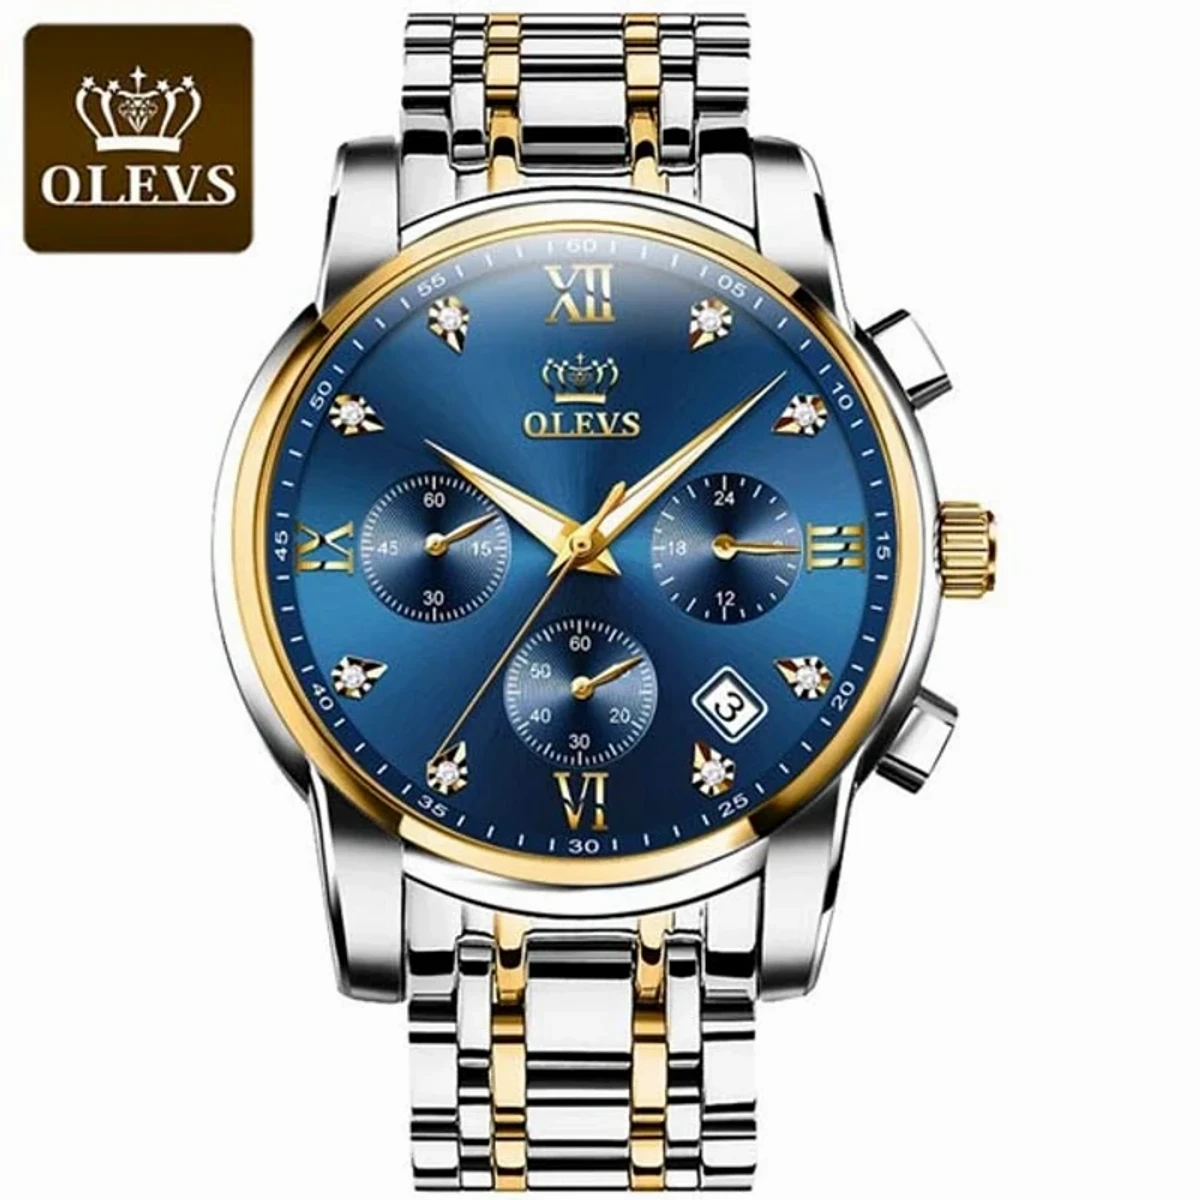 OLEVS MODEL  Watch for Men Stainless Steel Watches TOTON AR DIAL BLUE ROUND GOLDEN - MAN WATCH